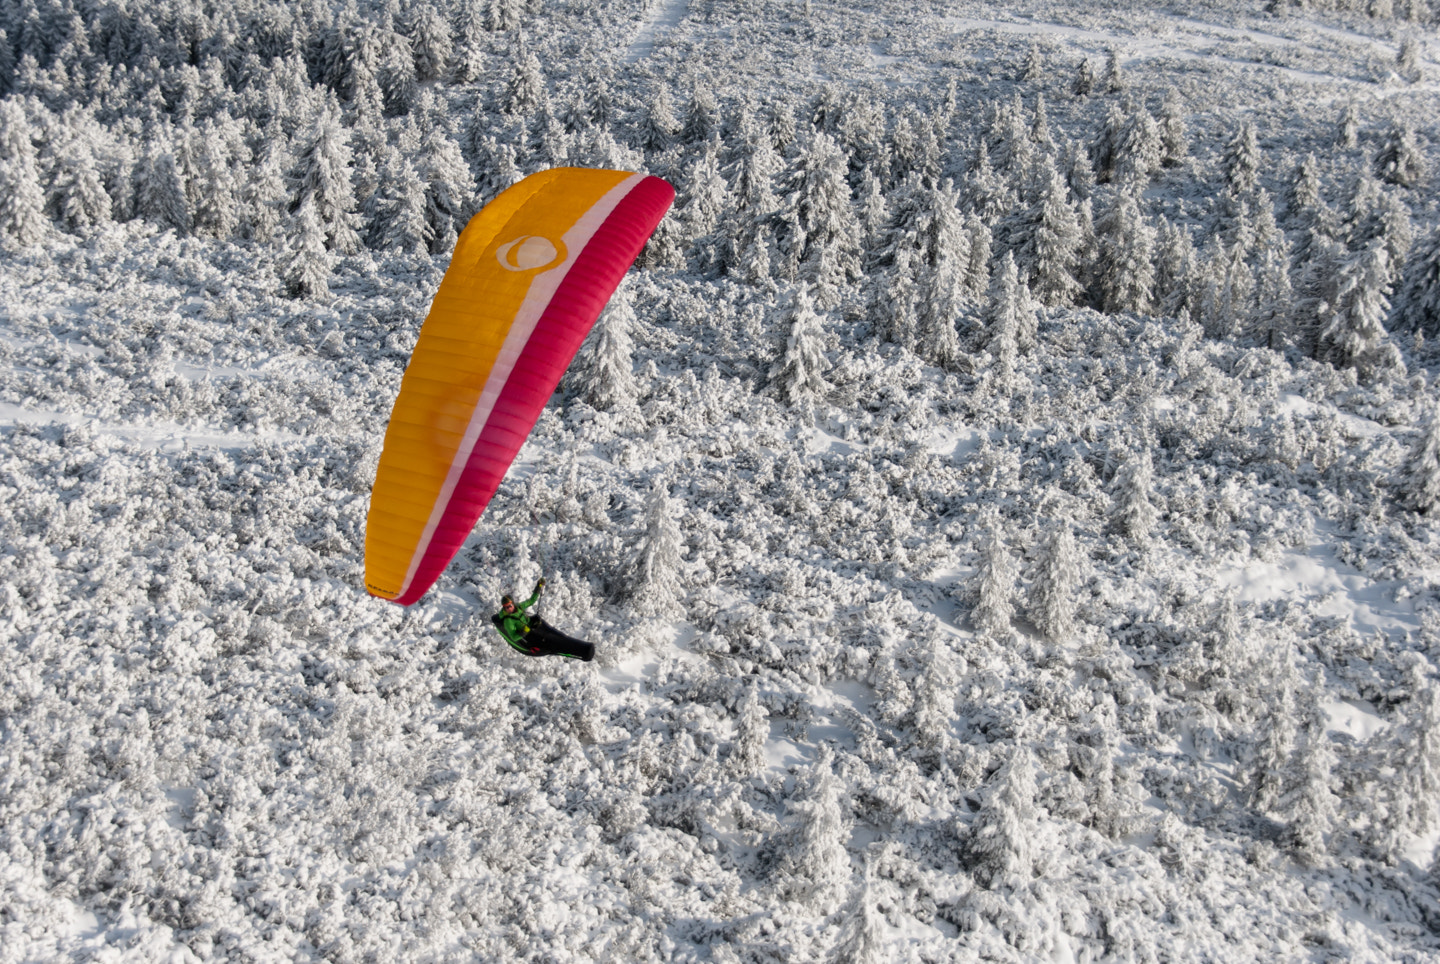 Nikon D80 + Sigma 18-200mm F3.5-6.3 DC sample photo. Paragliding in a winter-wonderland photography